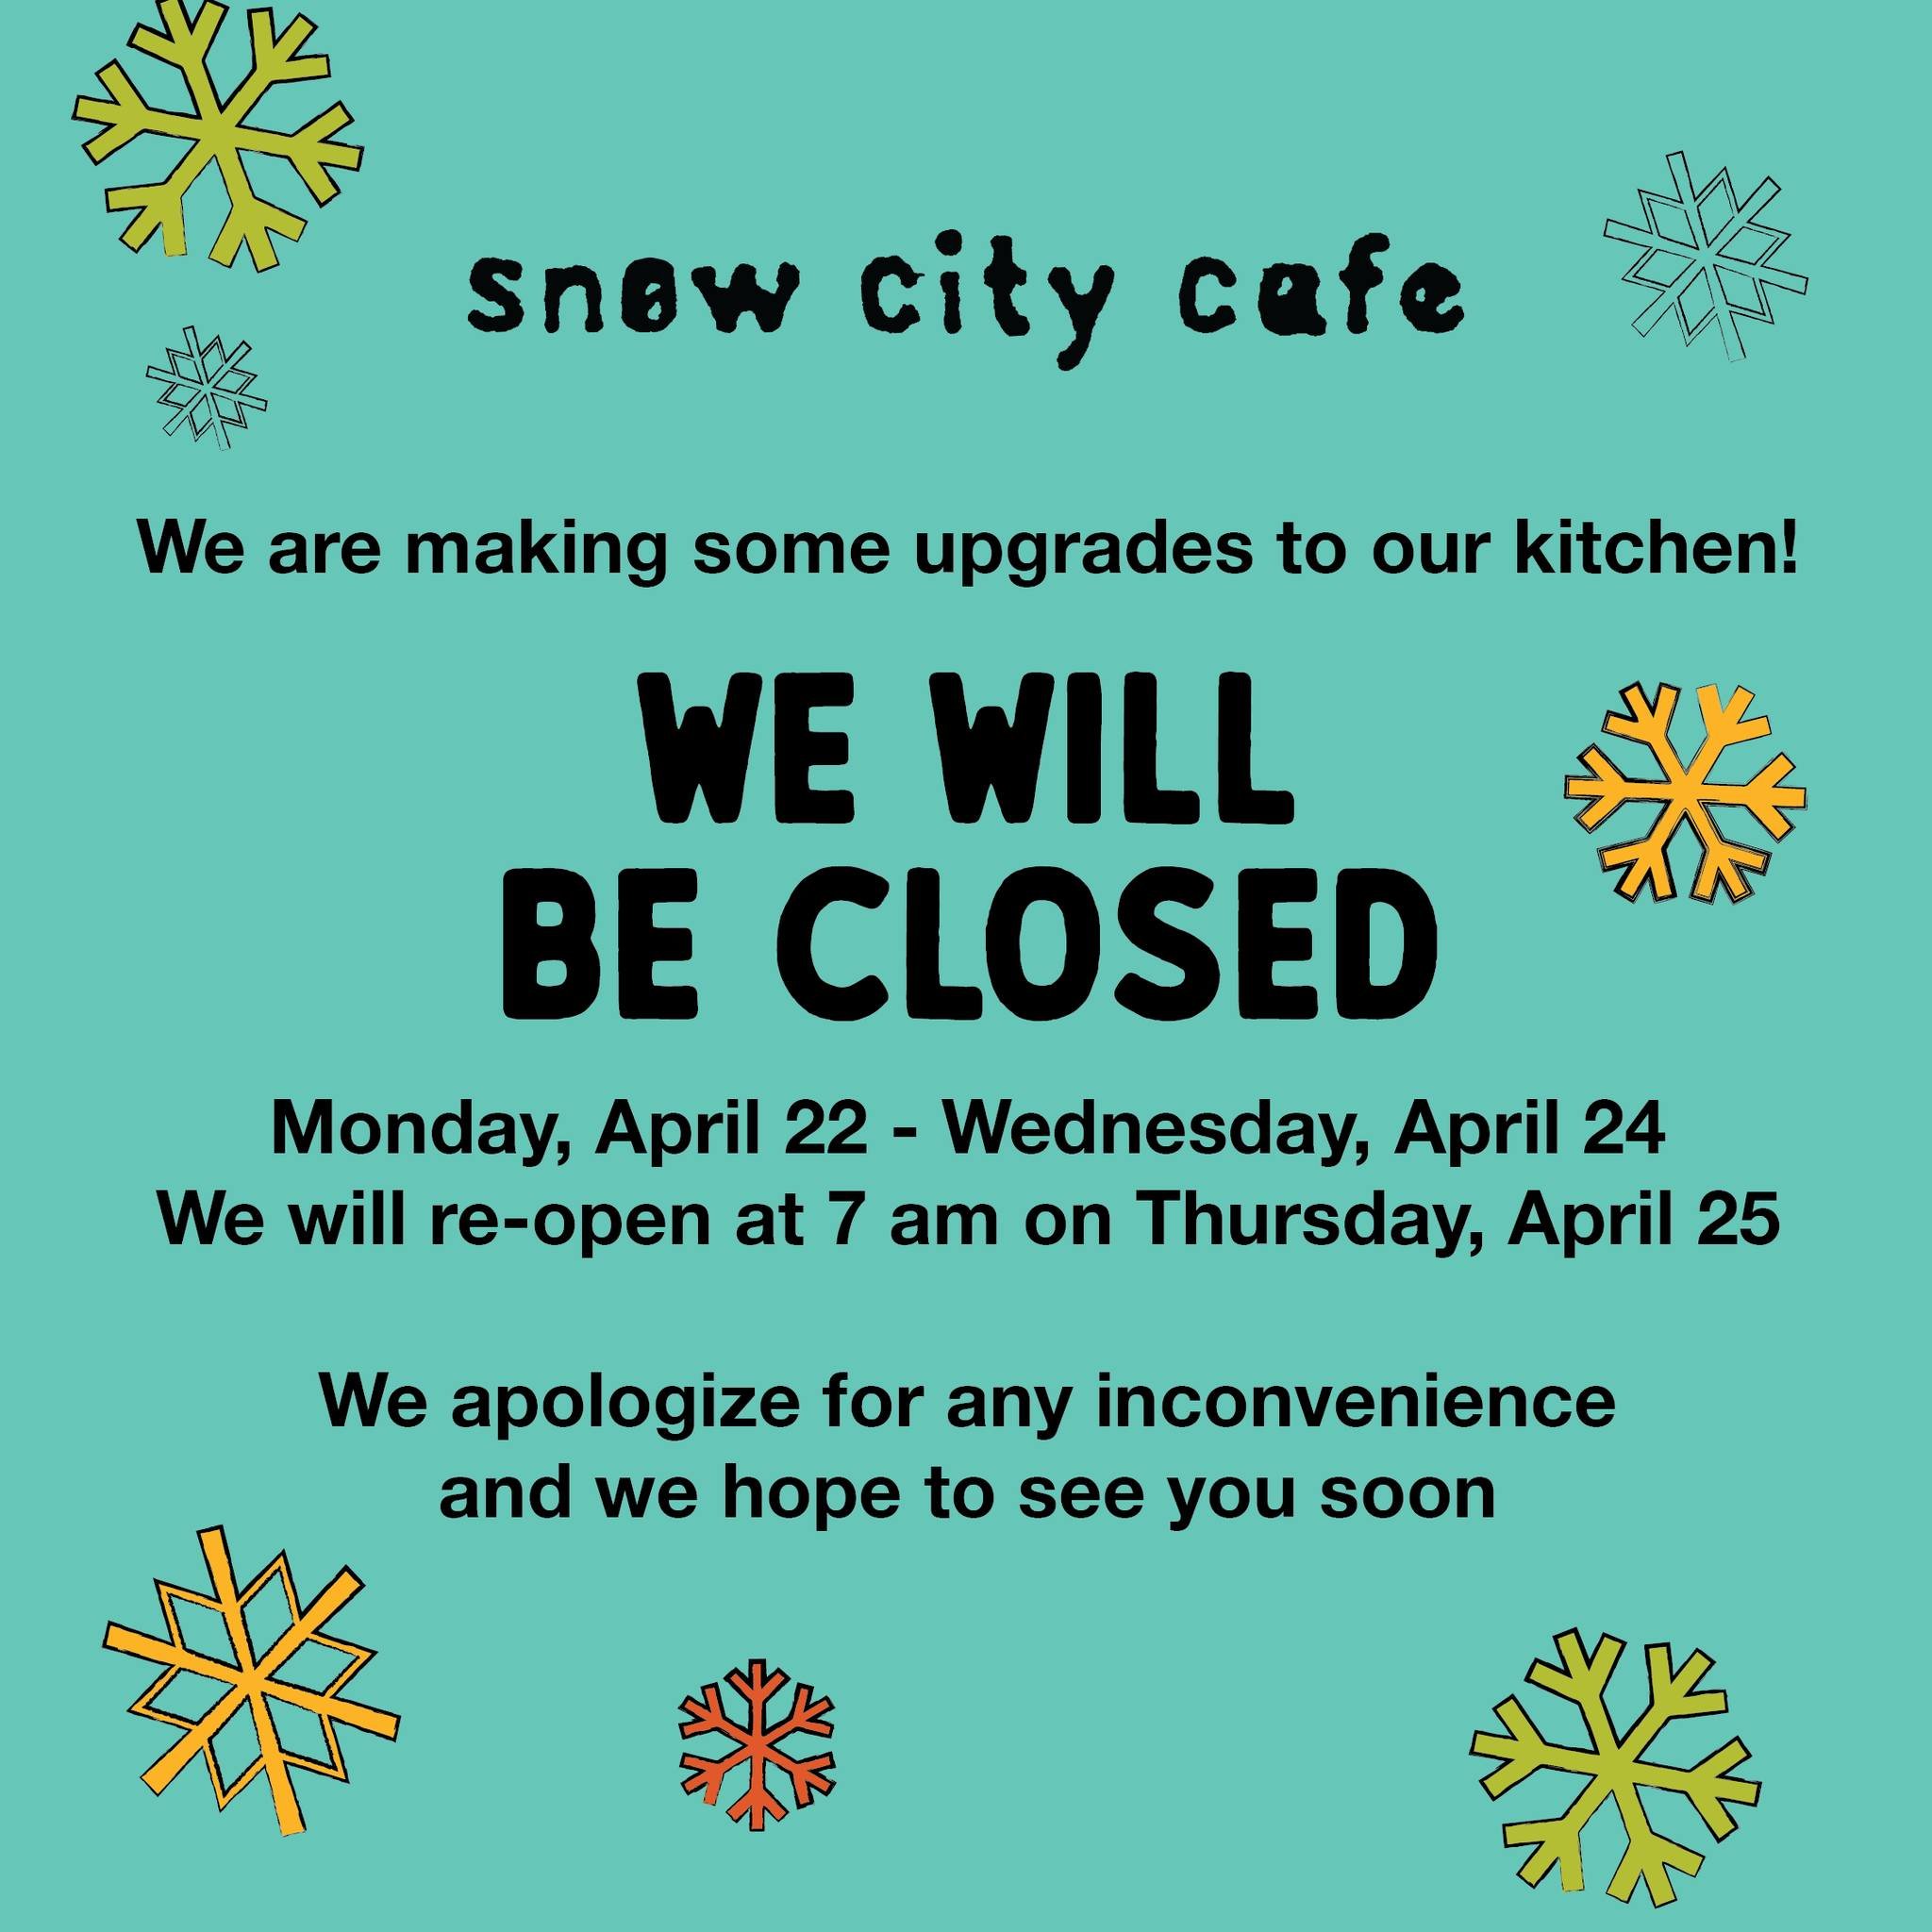 We are making upgrades to our kitchen, and are CLOSED TOMORROW (MONDAY) through WEDNESDAY for maintenance.
See you soon!